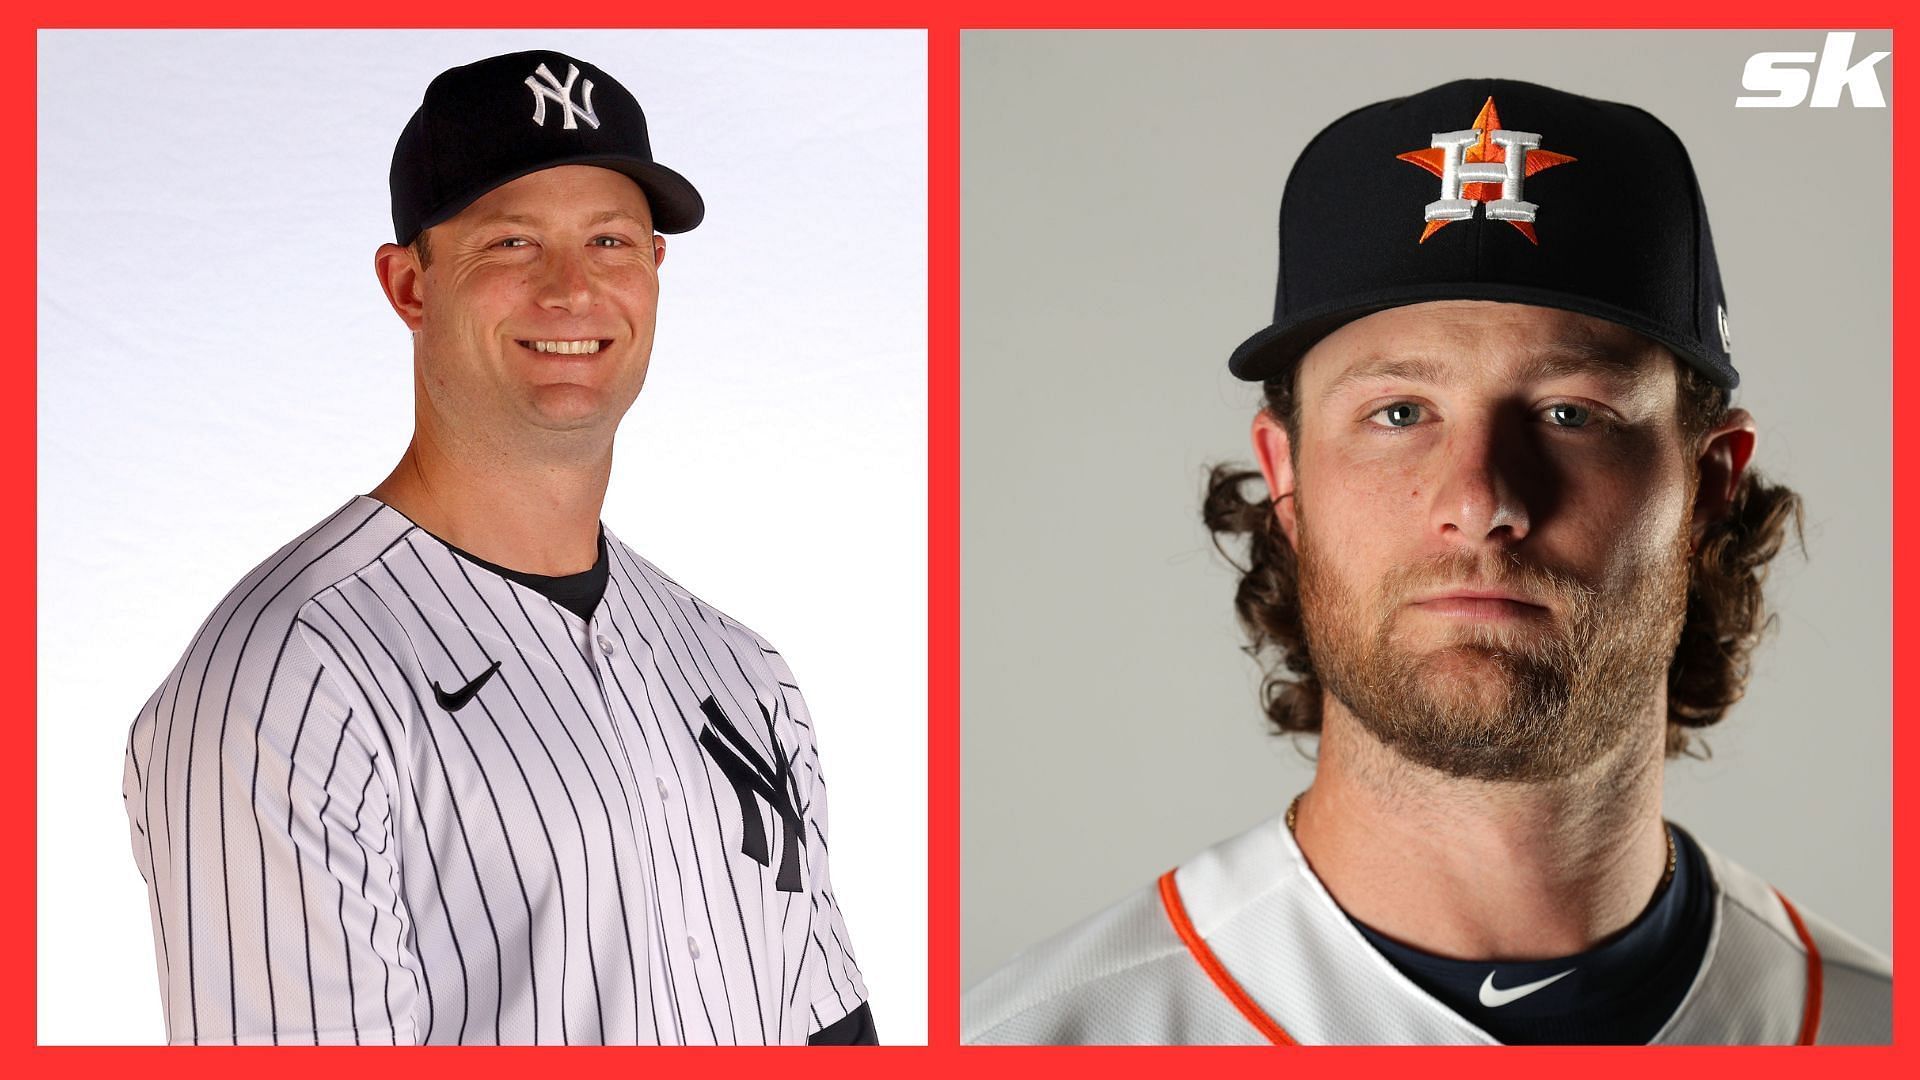 Why aren't New York Yankees players allowed to grow a beard